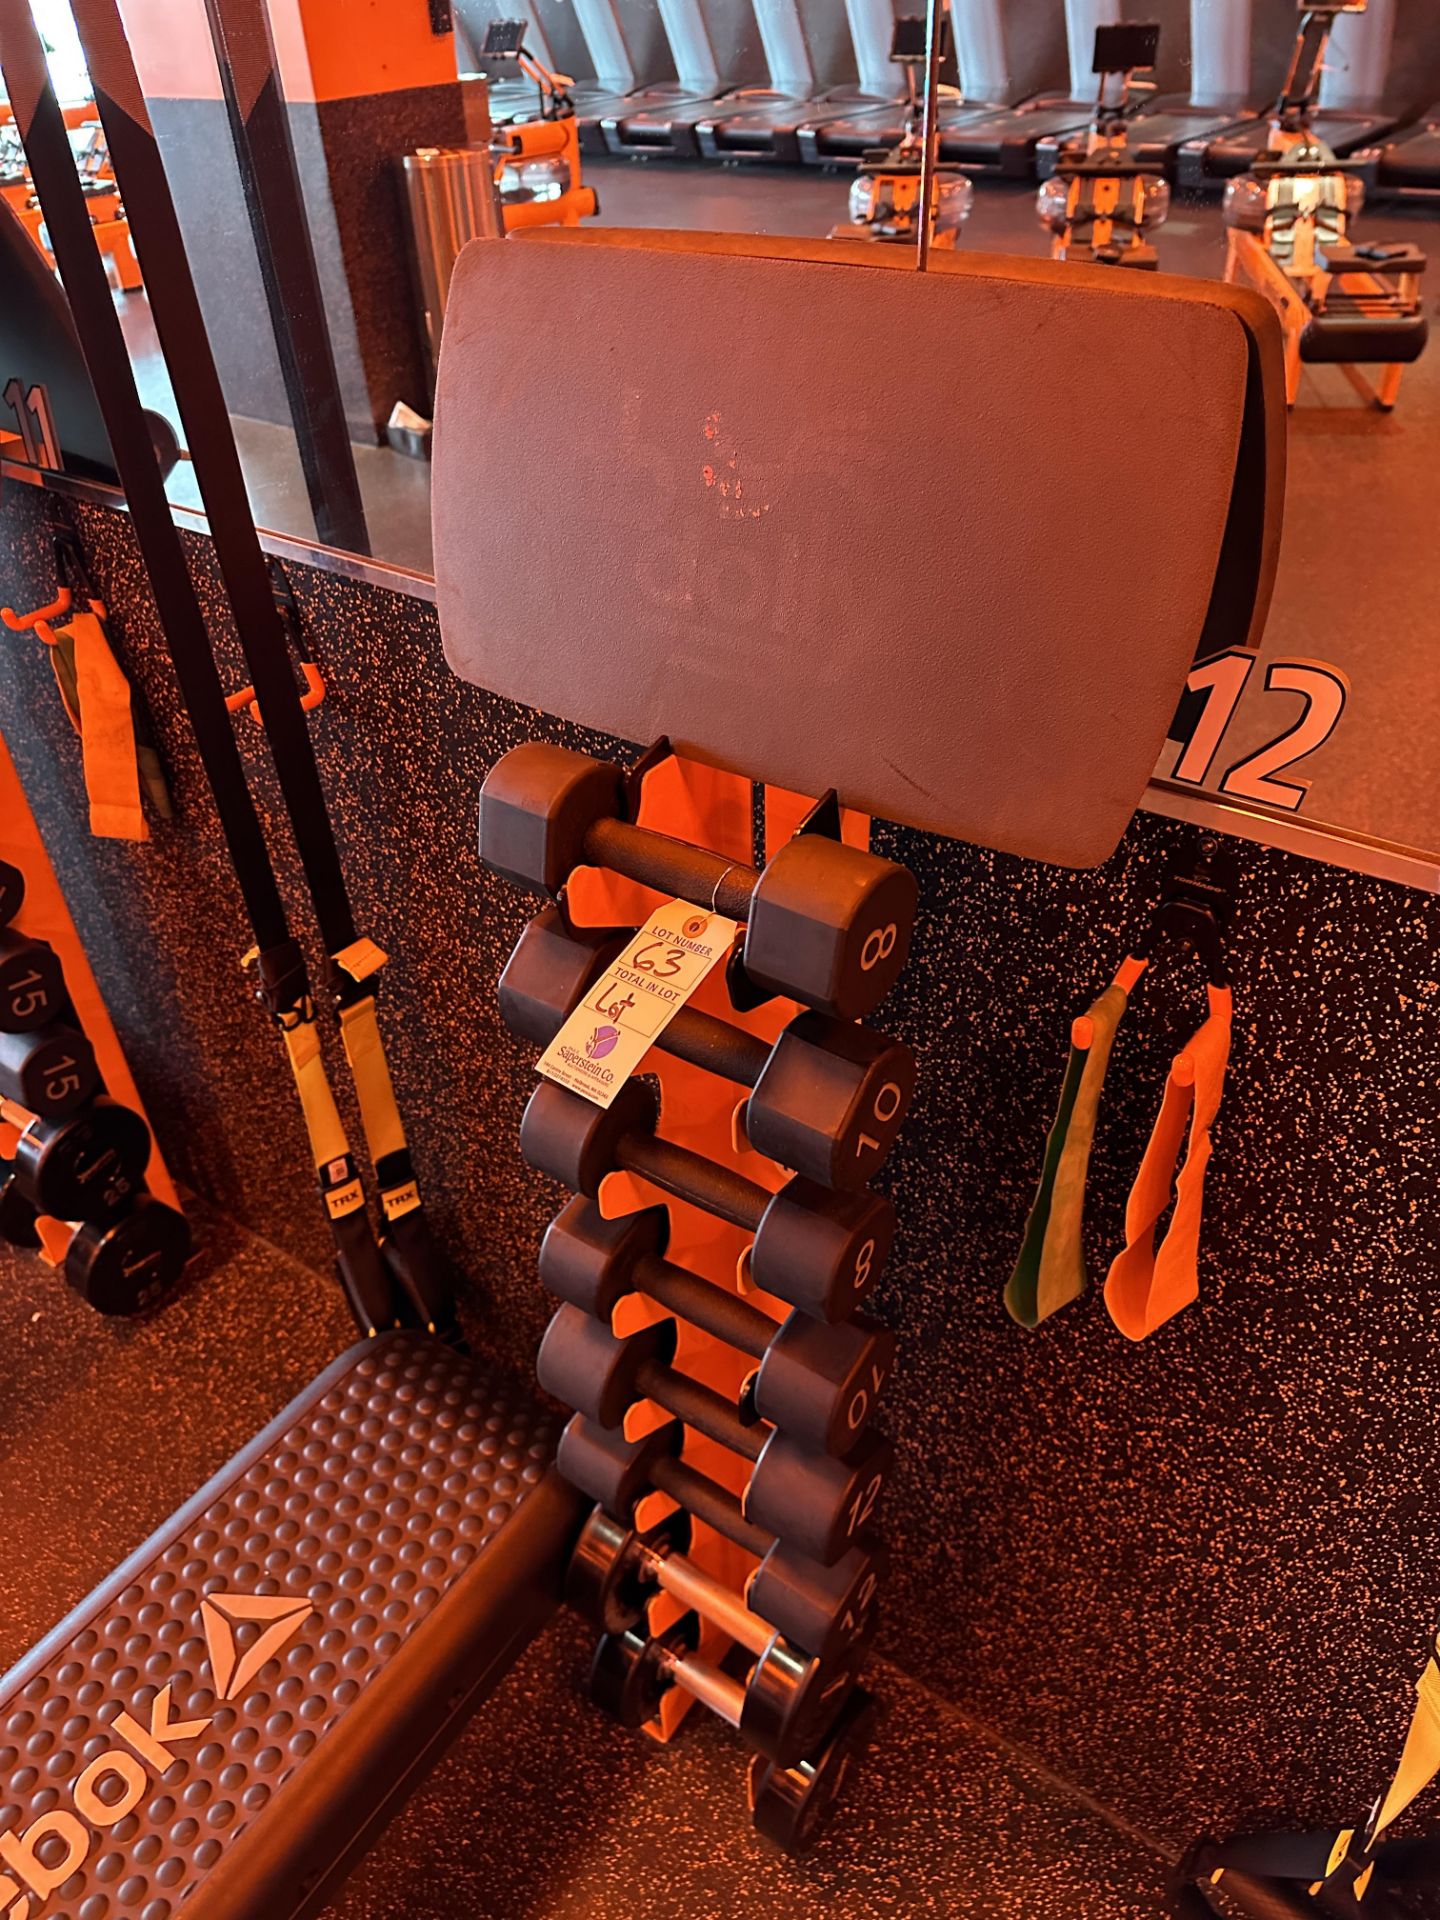 {LOT} American Barbell Weight Set (Pairs of Weights 8, 10, 12 & 20Lb.) w/Weight Tree, Reebok Step - Image 2 of 3